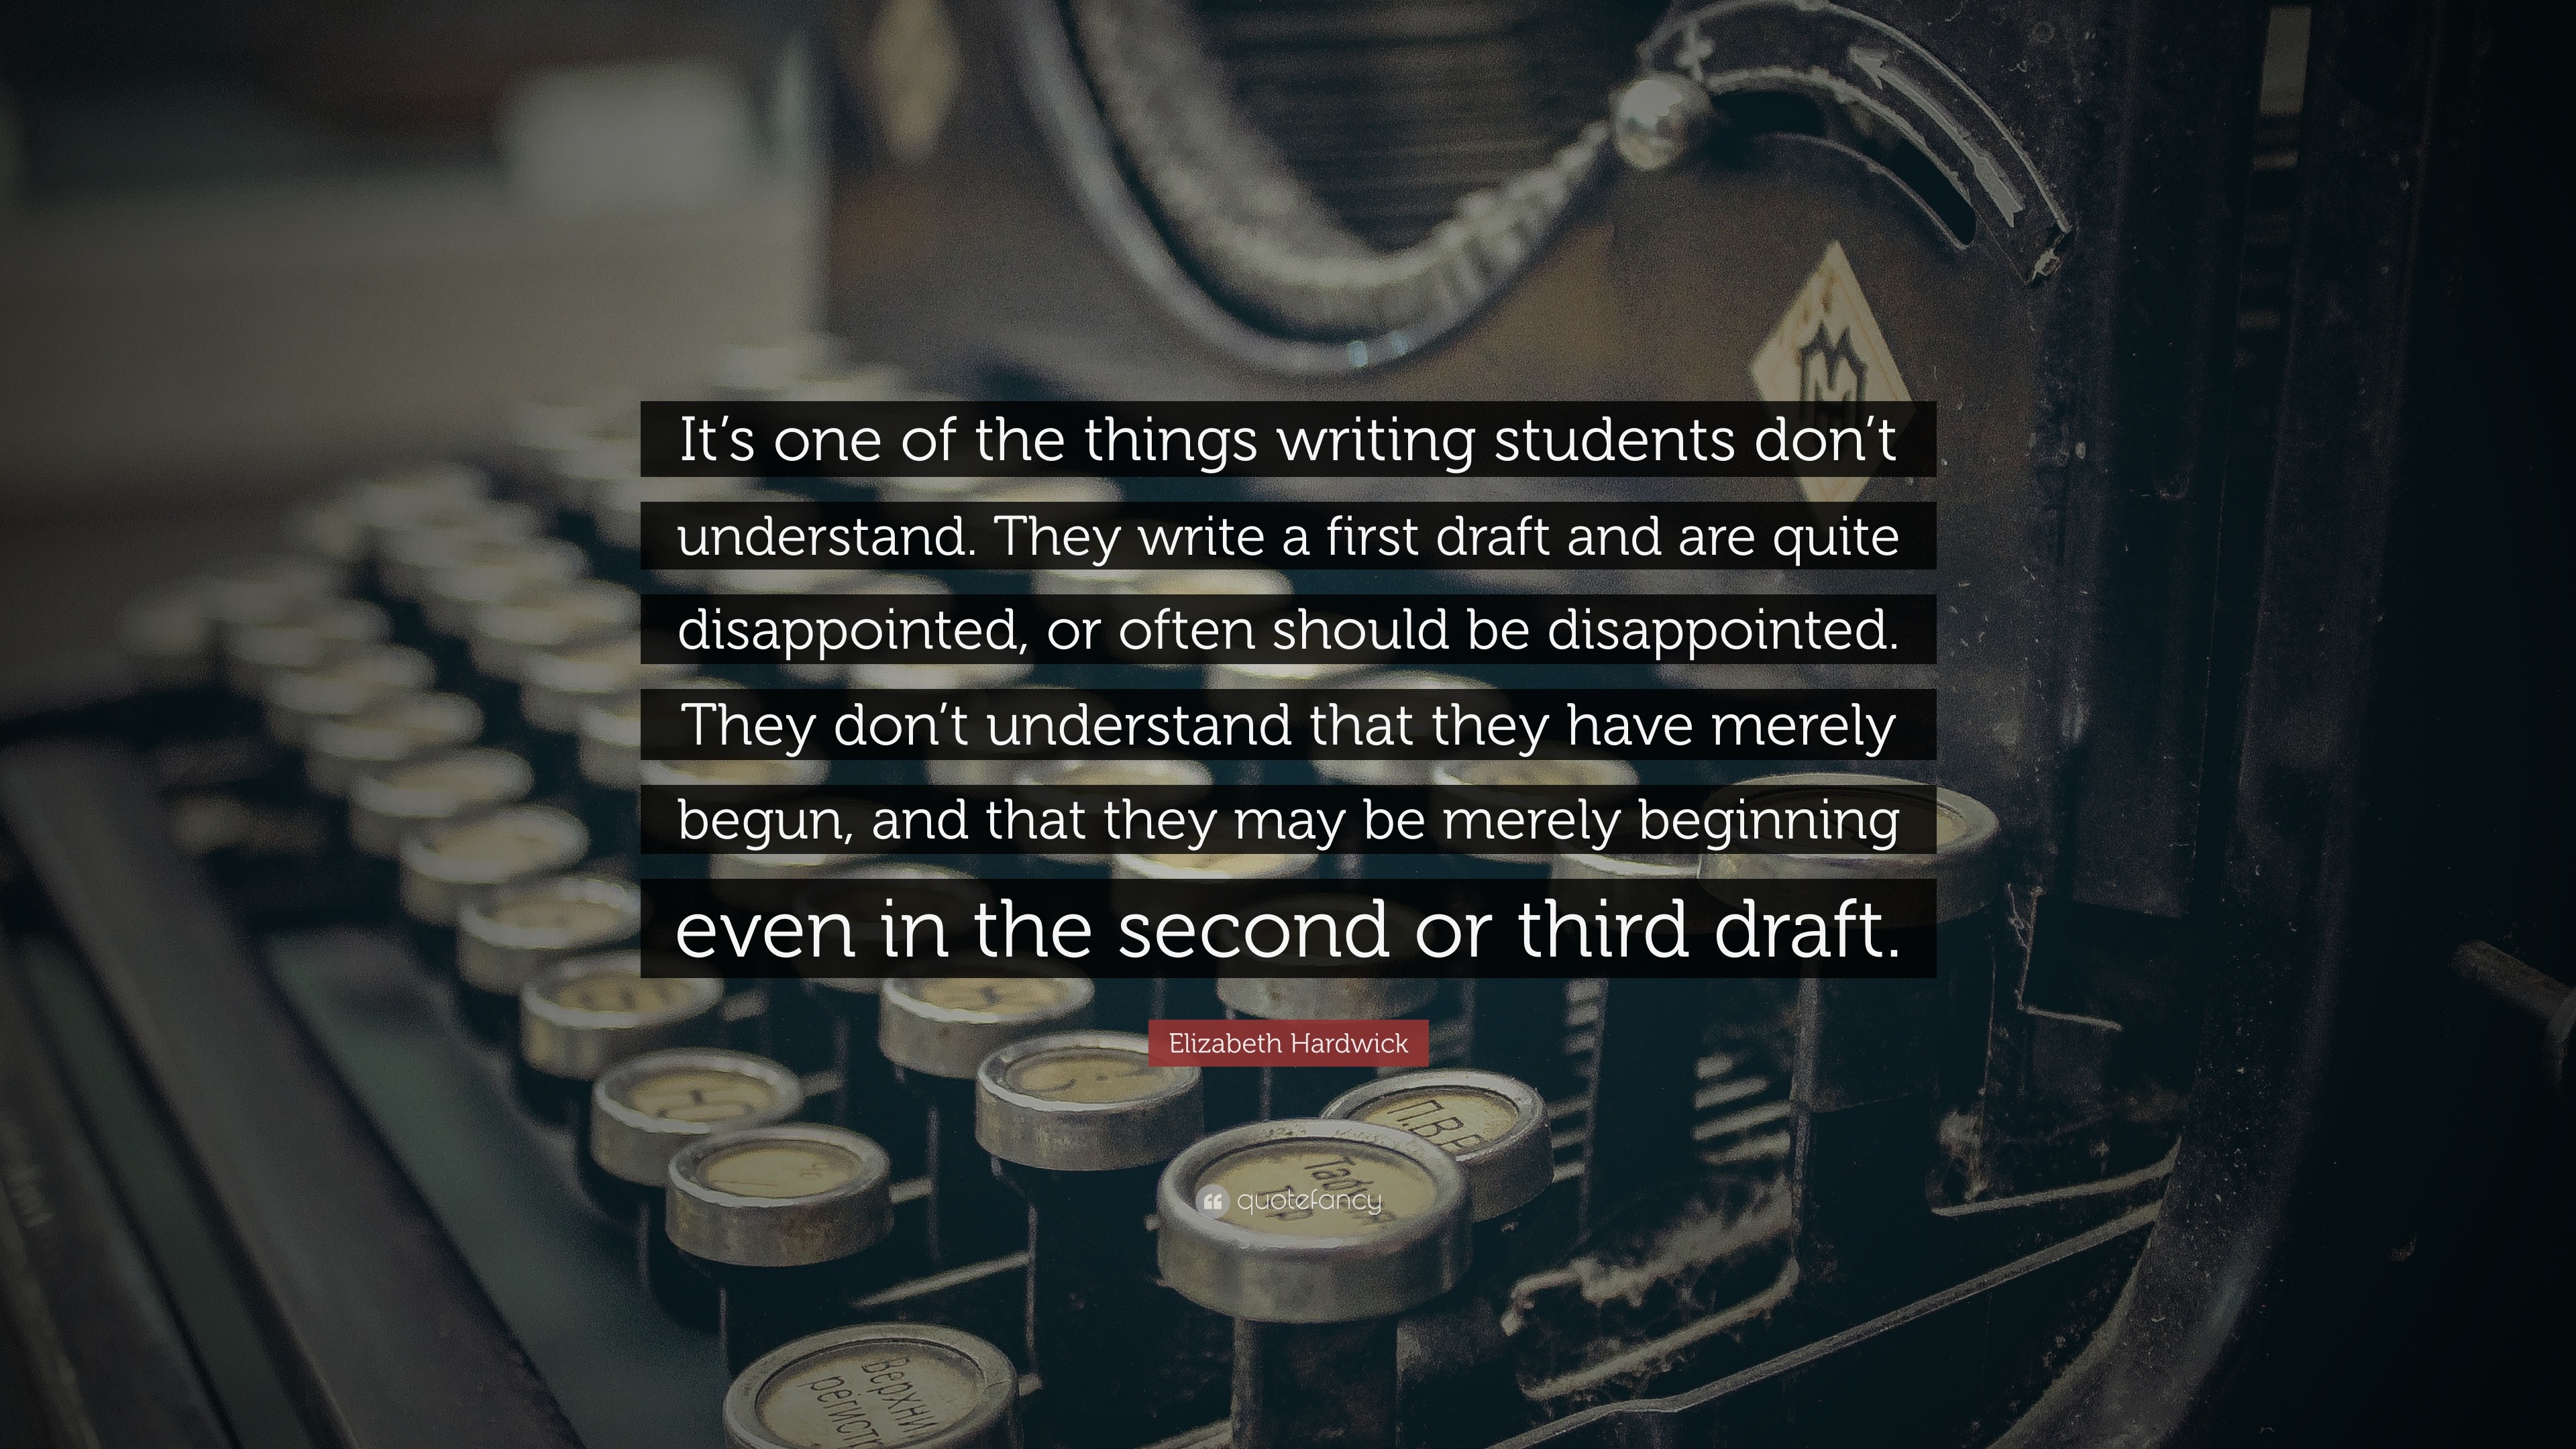 Elizabeth Hardwick Quote It S One Of The Things Writing Students Don T Understand They Write A First Draft And Are Quite Disappointed Or Often